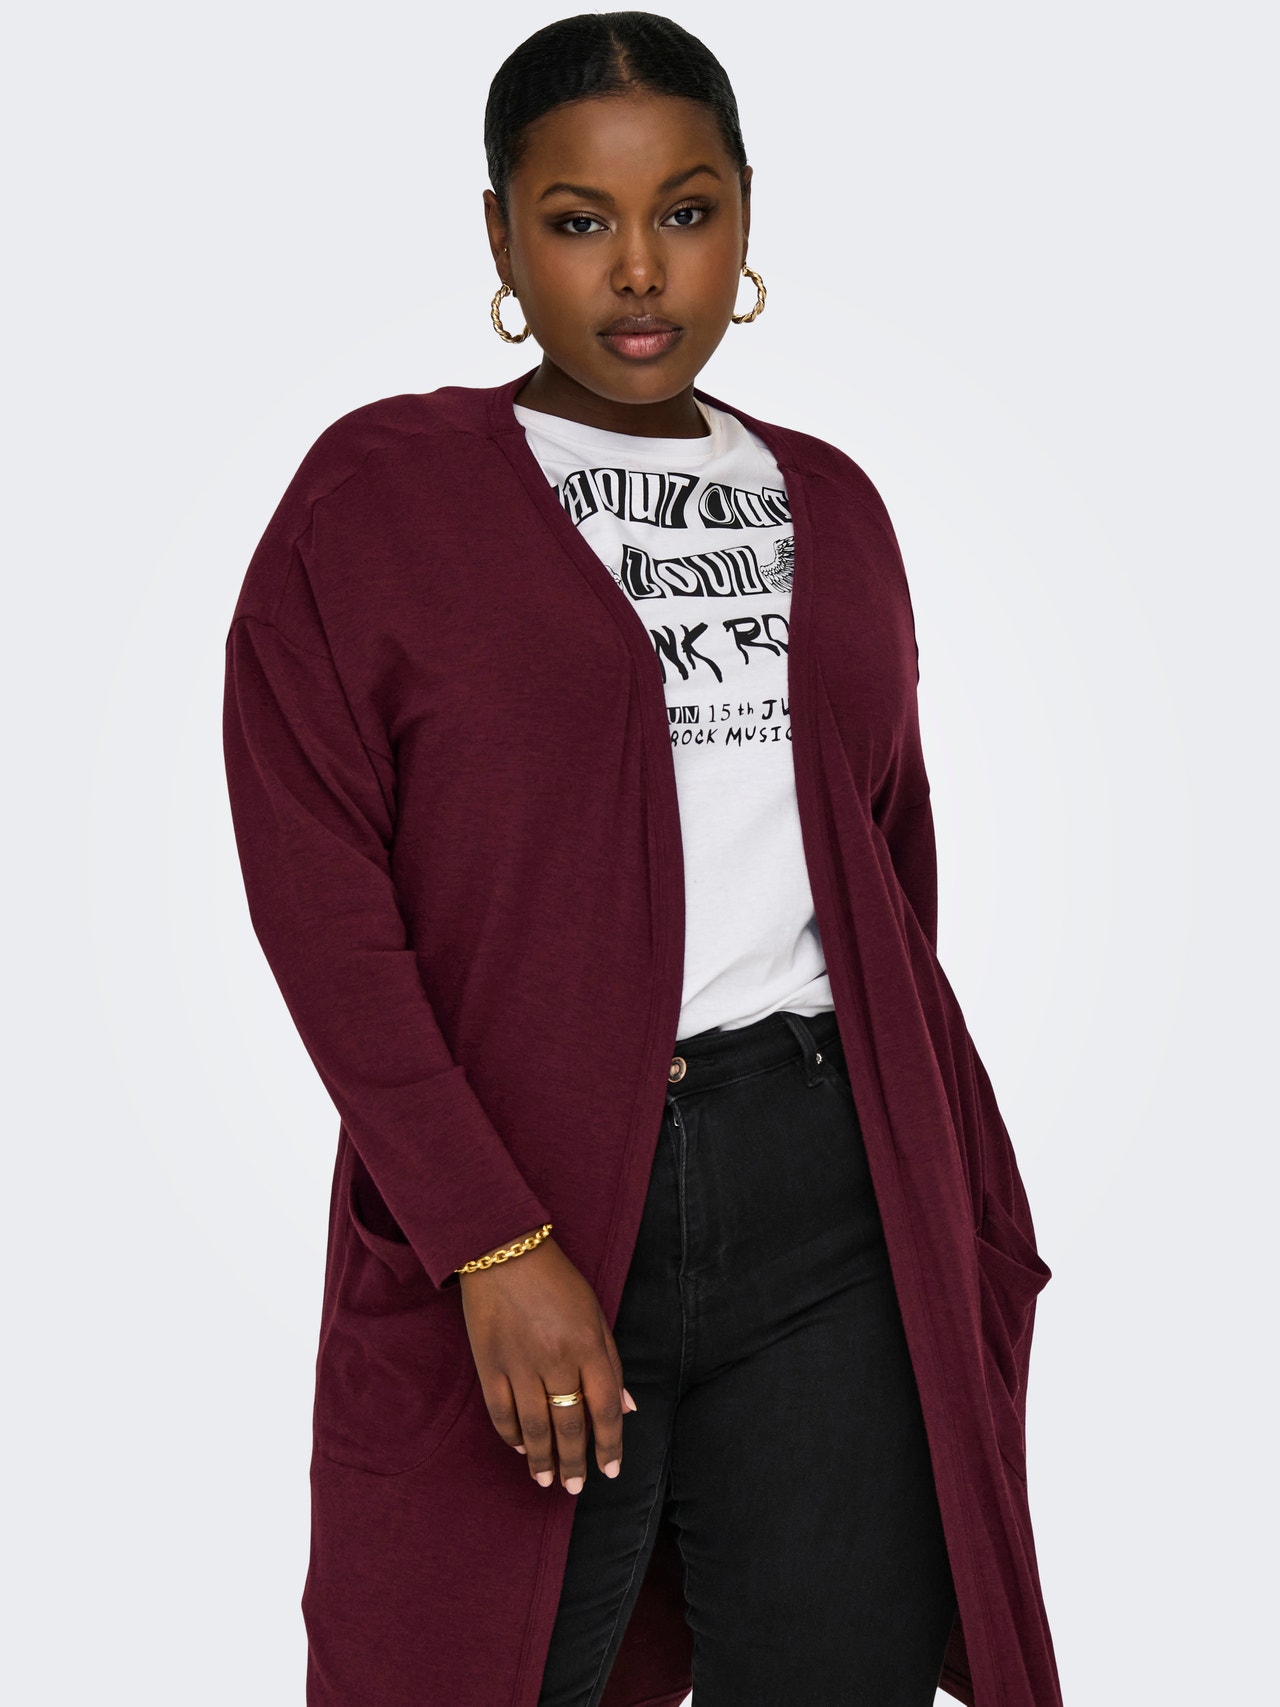 ONLY Curvy lang Cardigan -Port Royale - 15239098